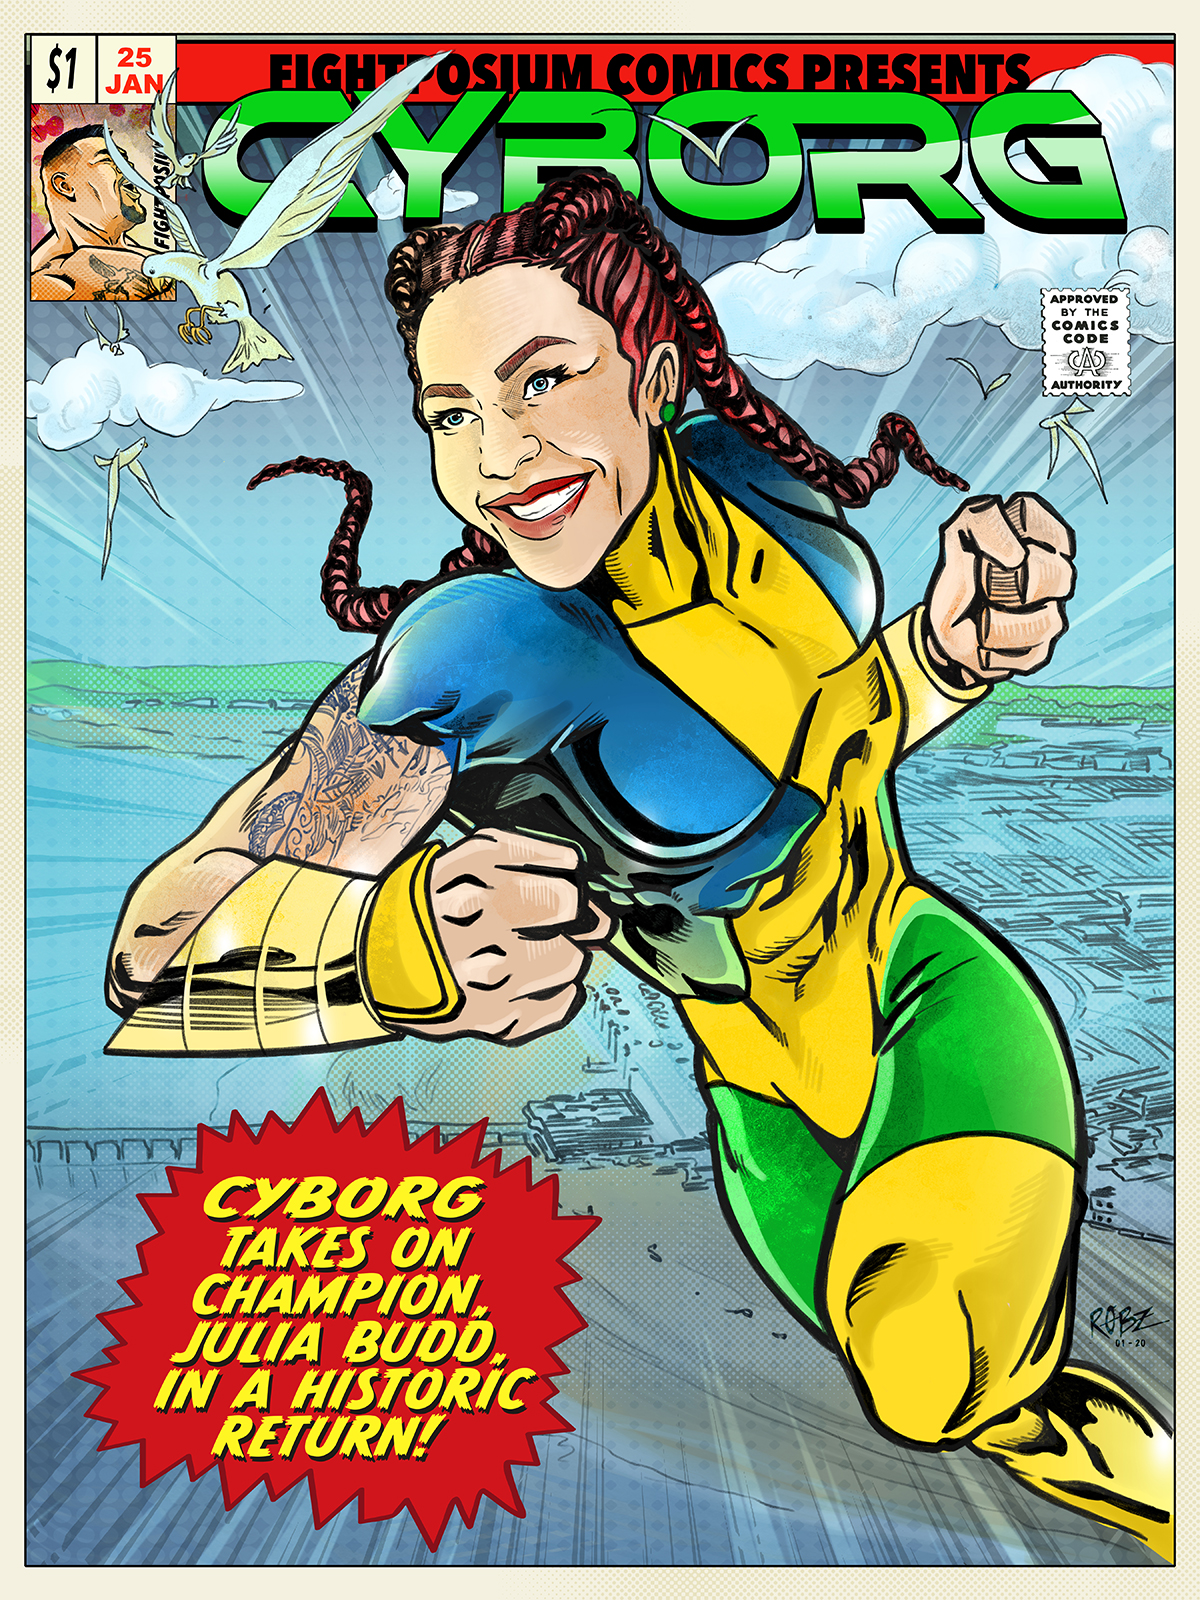 You are currently viewing Cris Cyborg’s Historic Return!